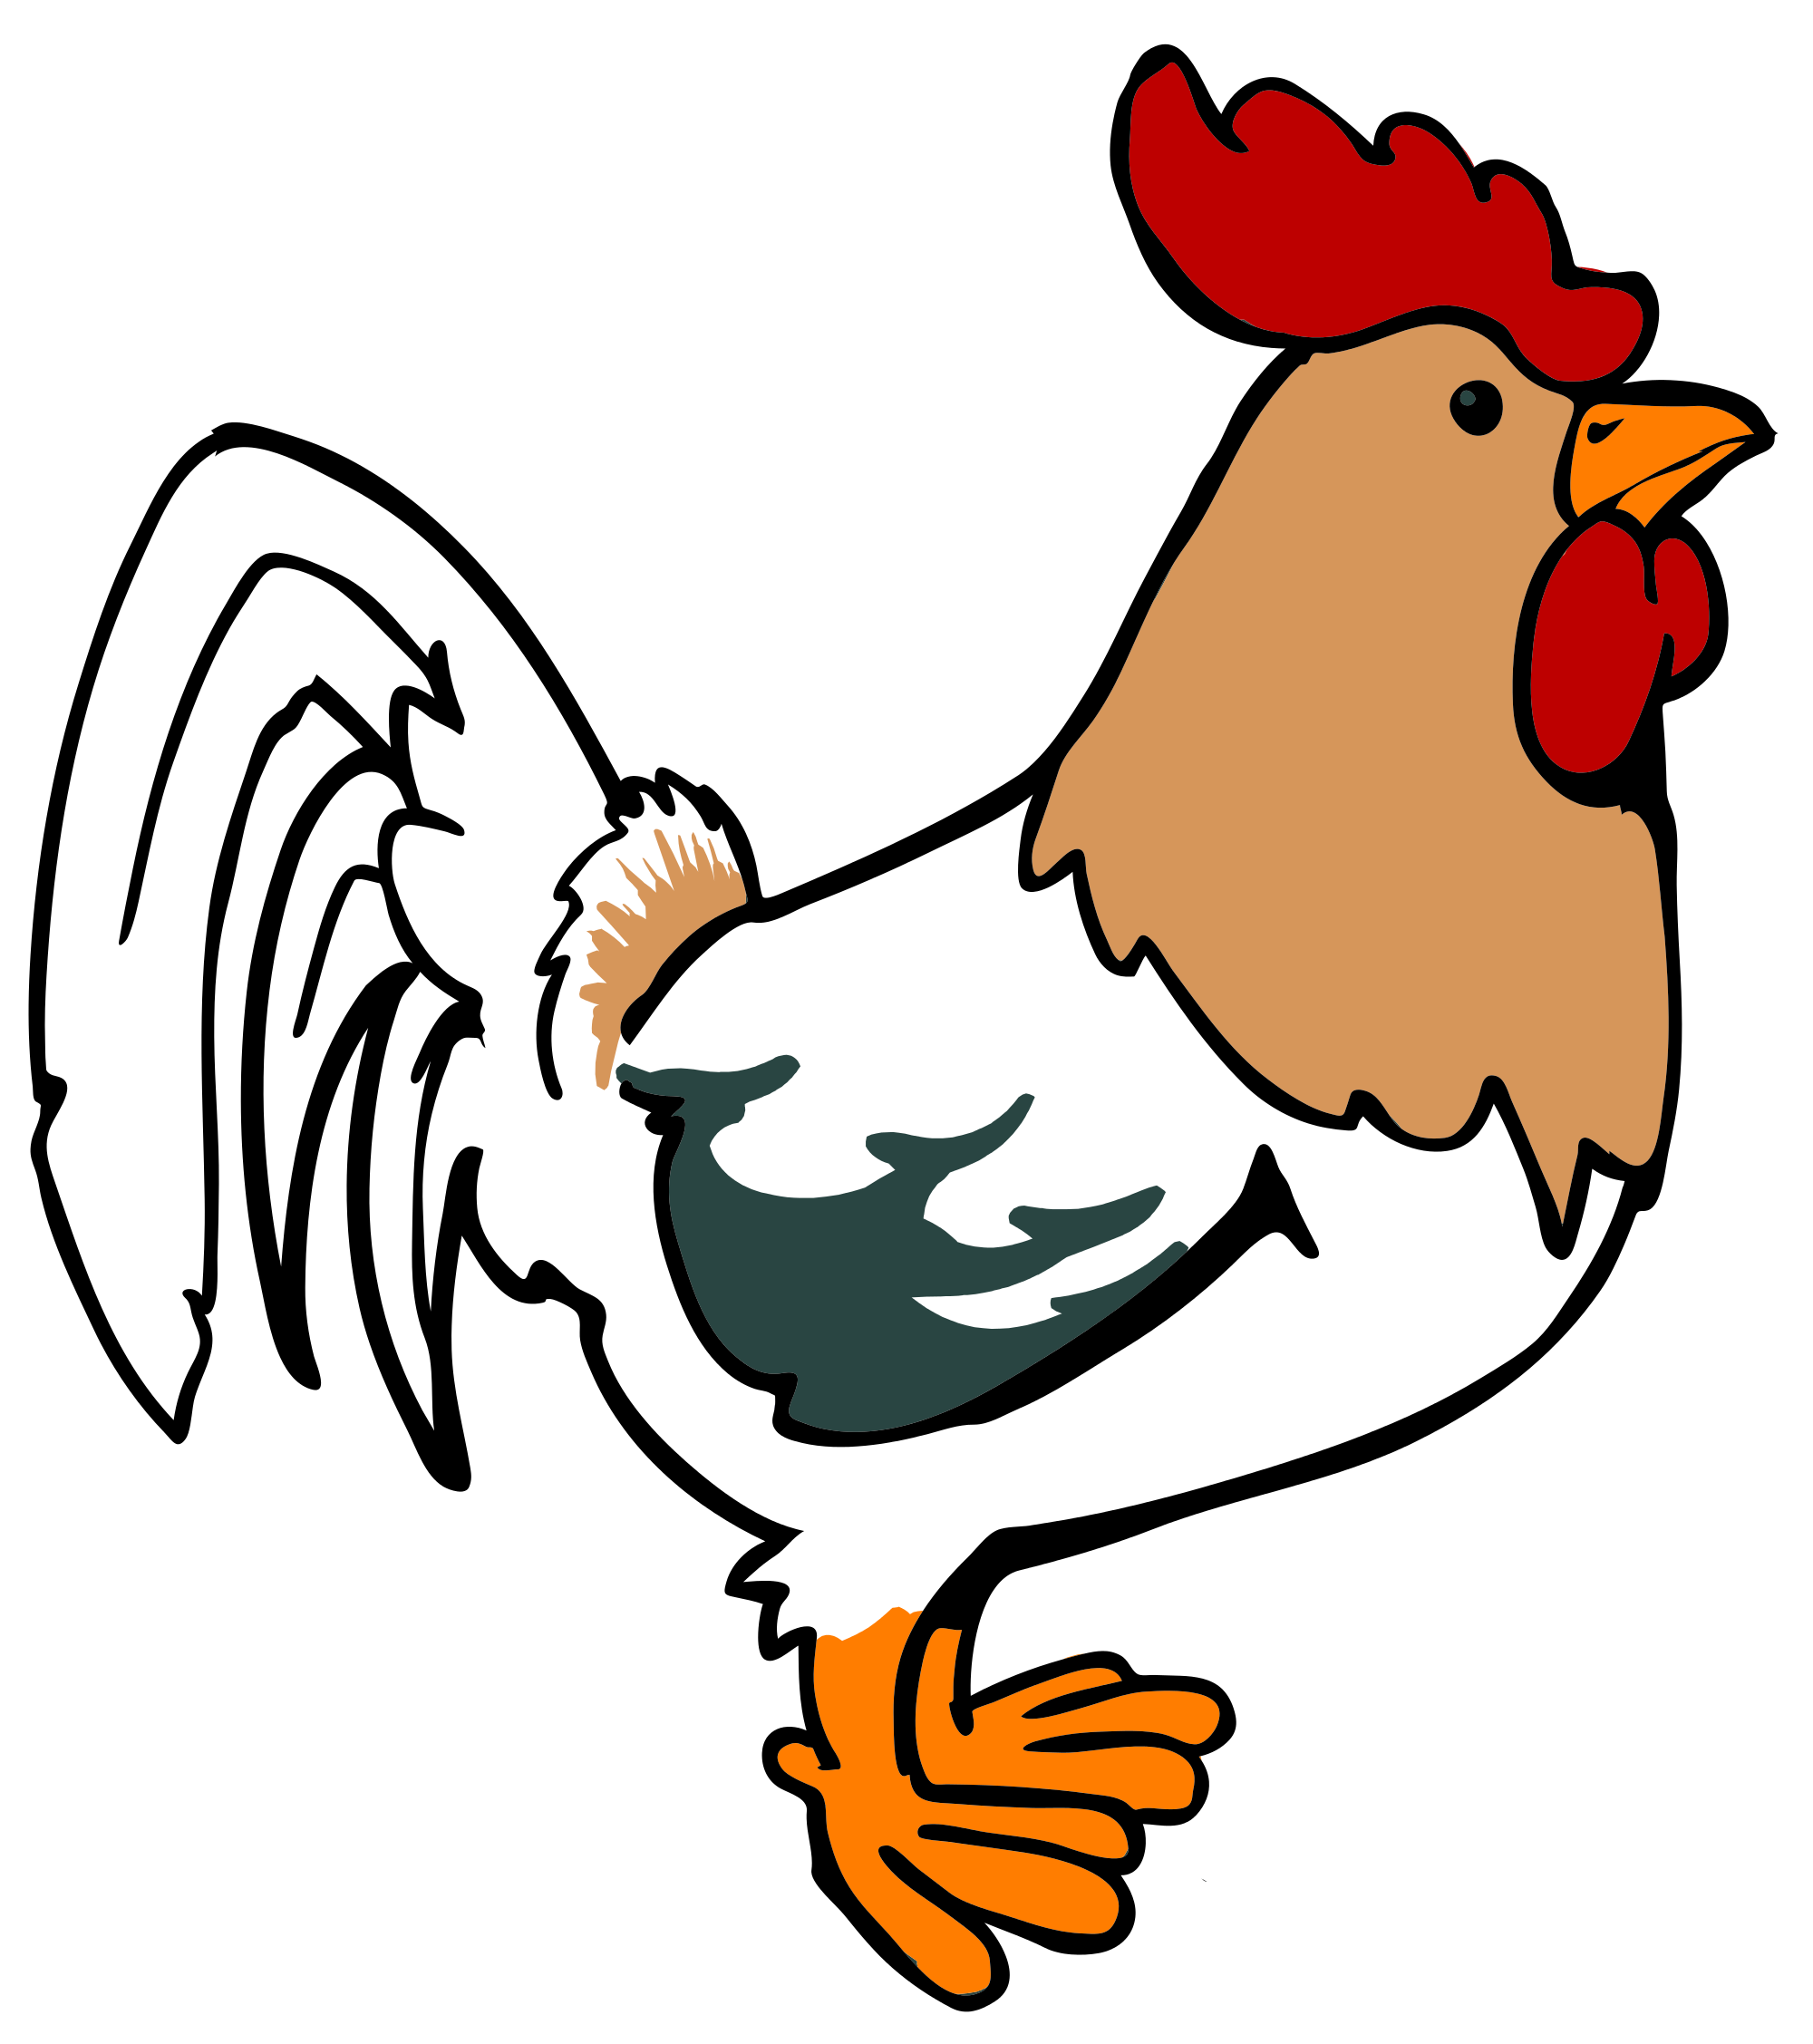 File:Rooster cartoon 04.svg